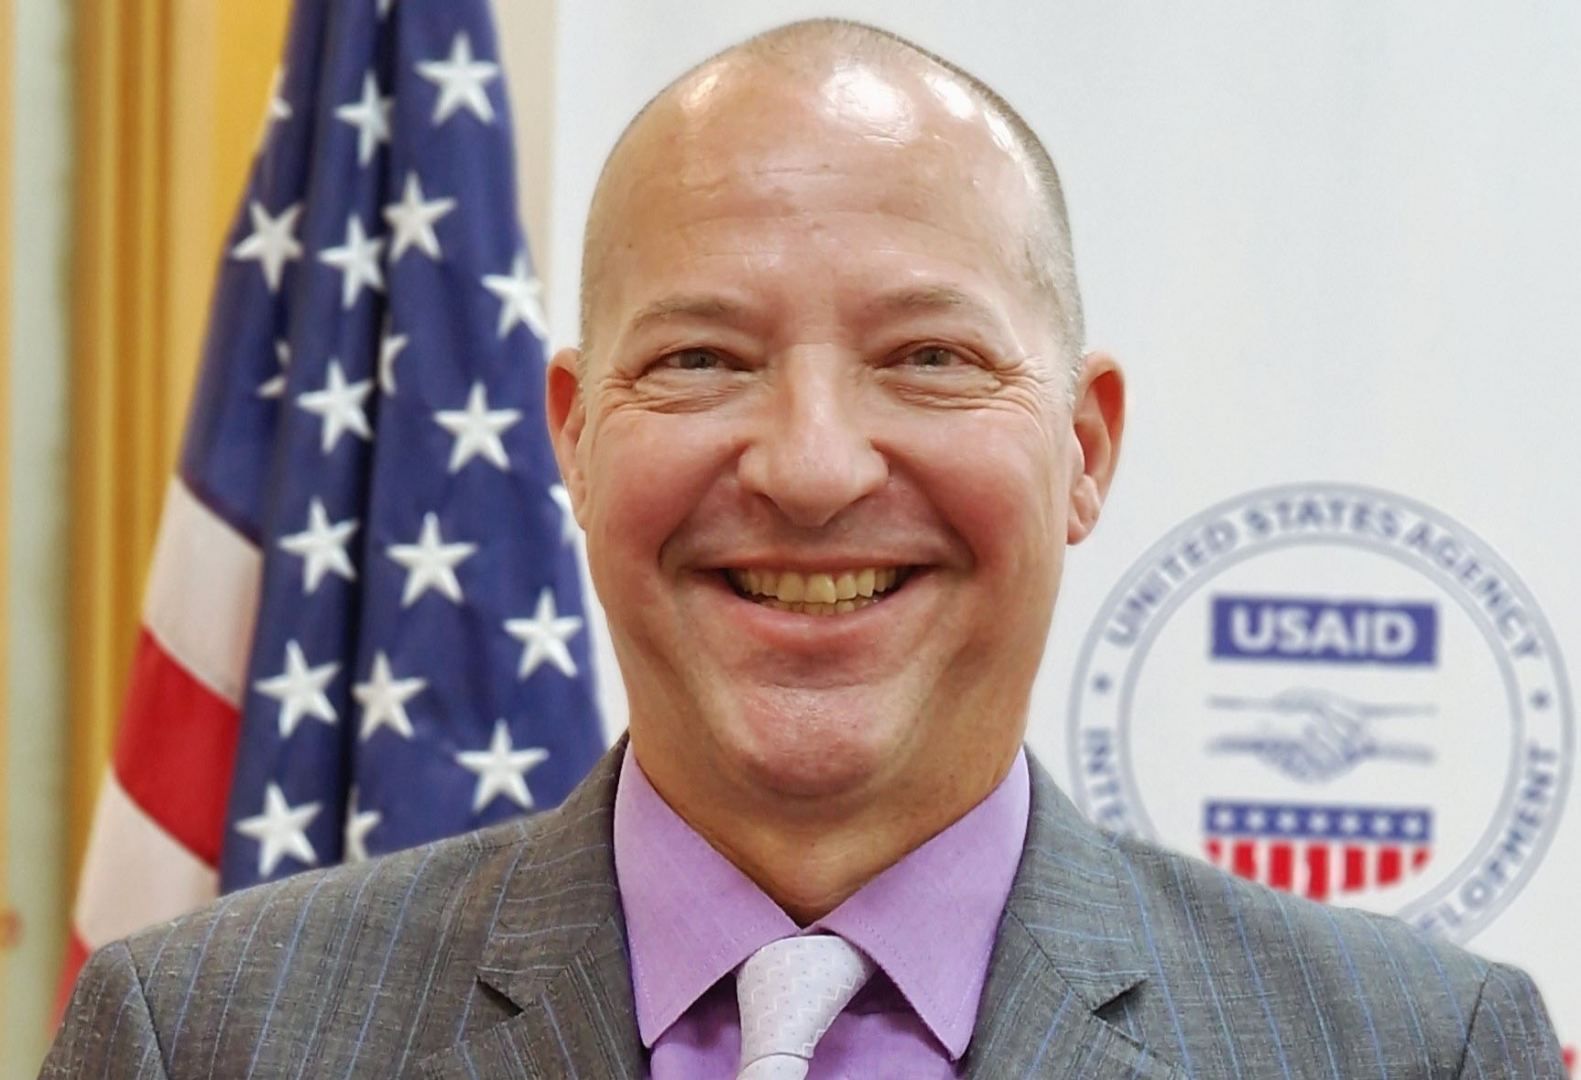 New USAID Mission Director for Azerbaijan named